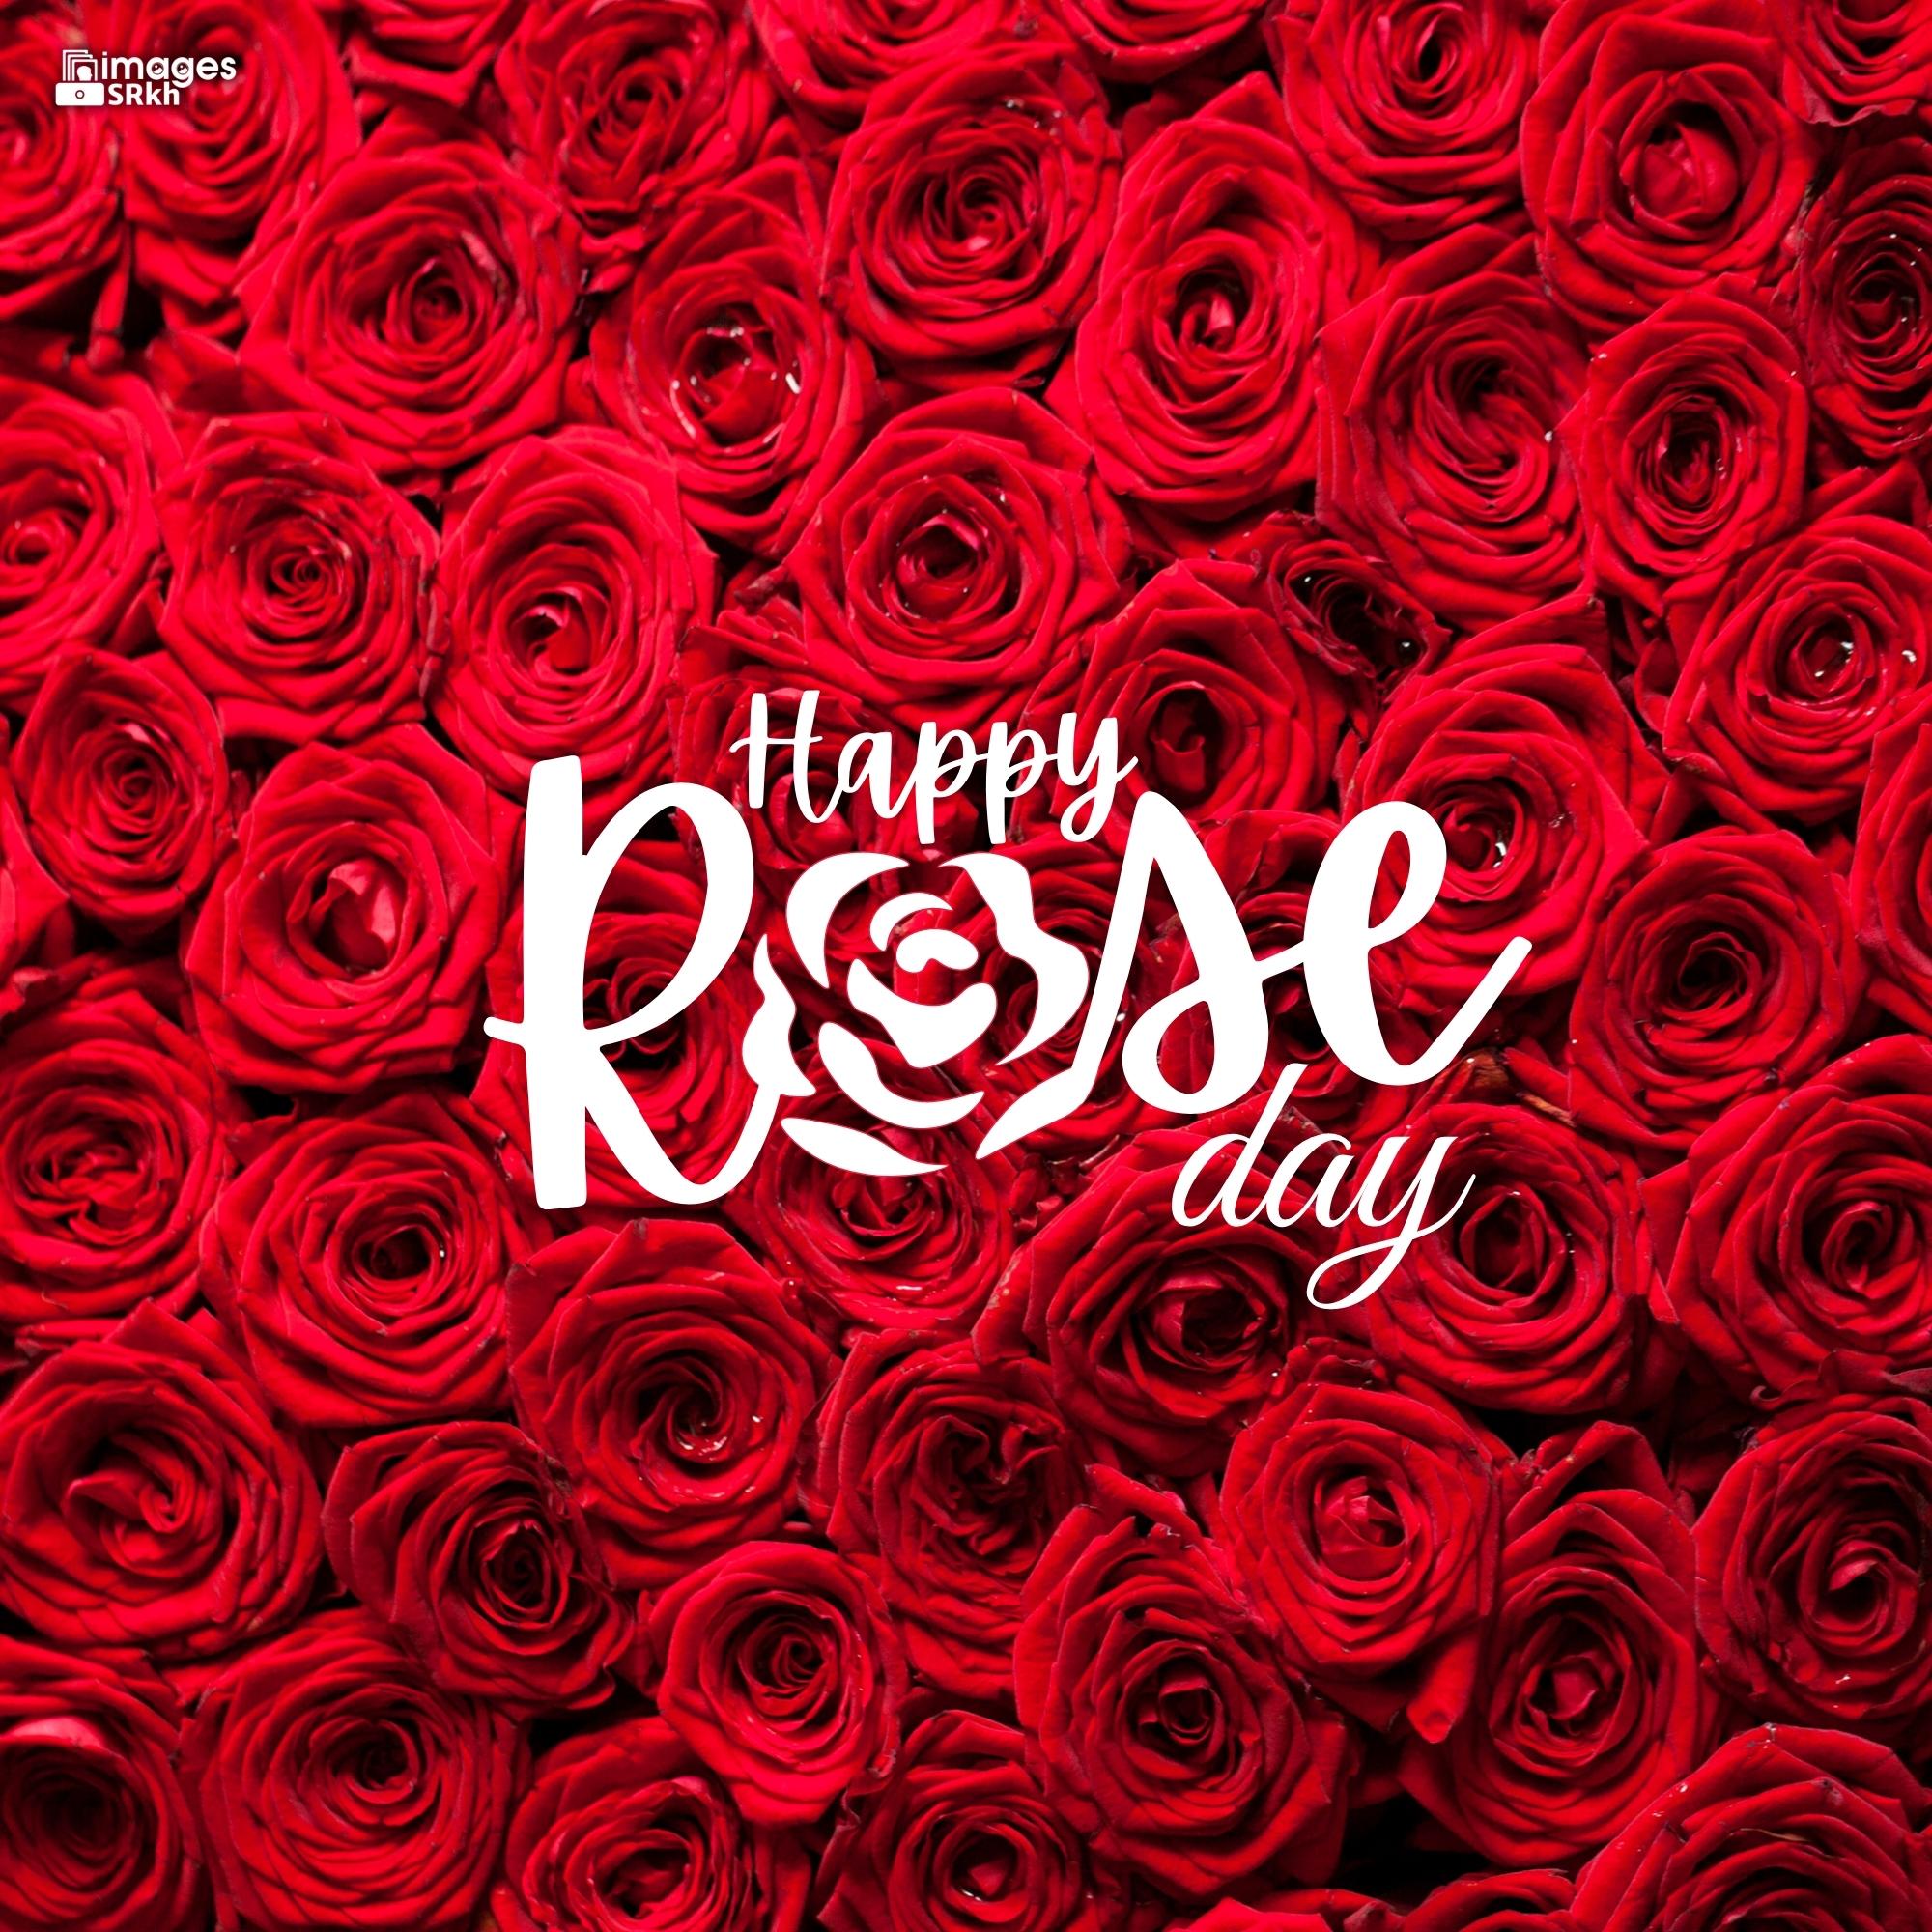 Happy Rose Day Image Hd Download (39)